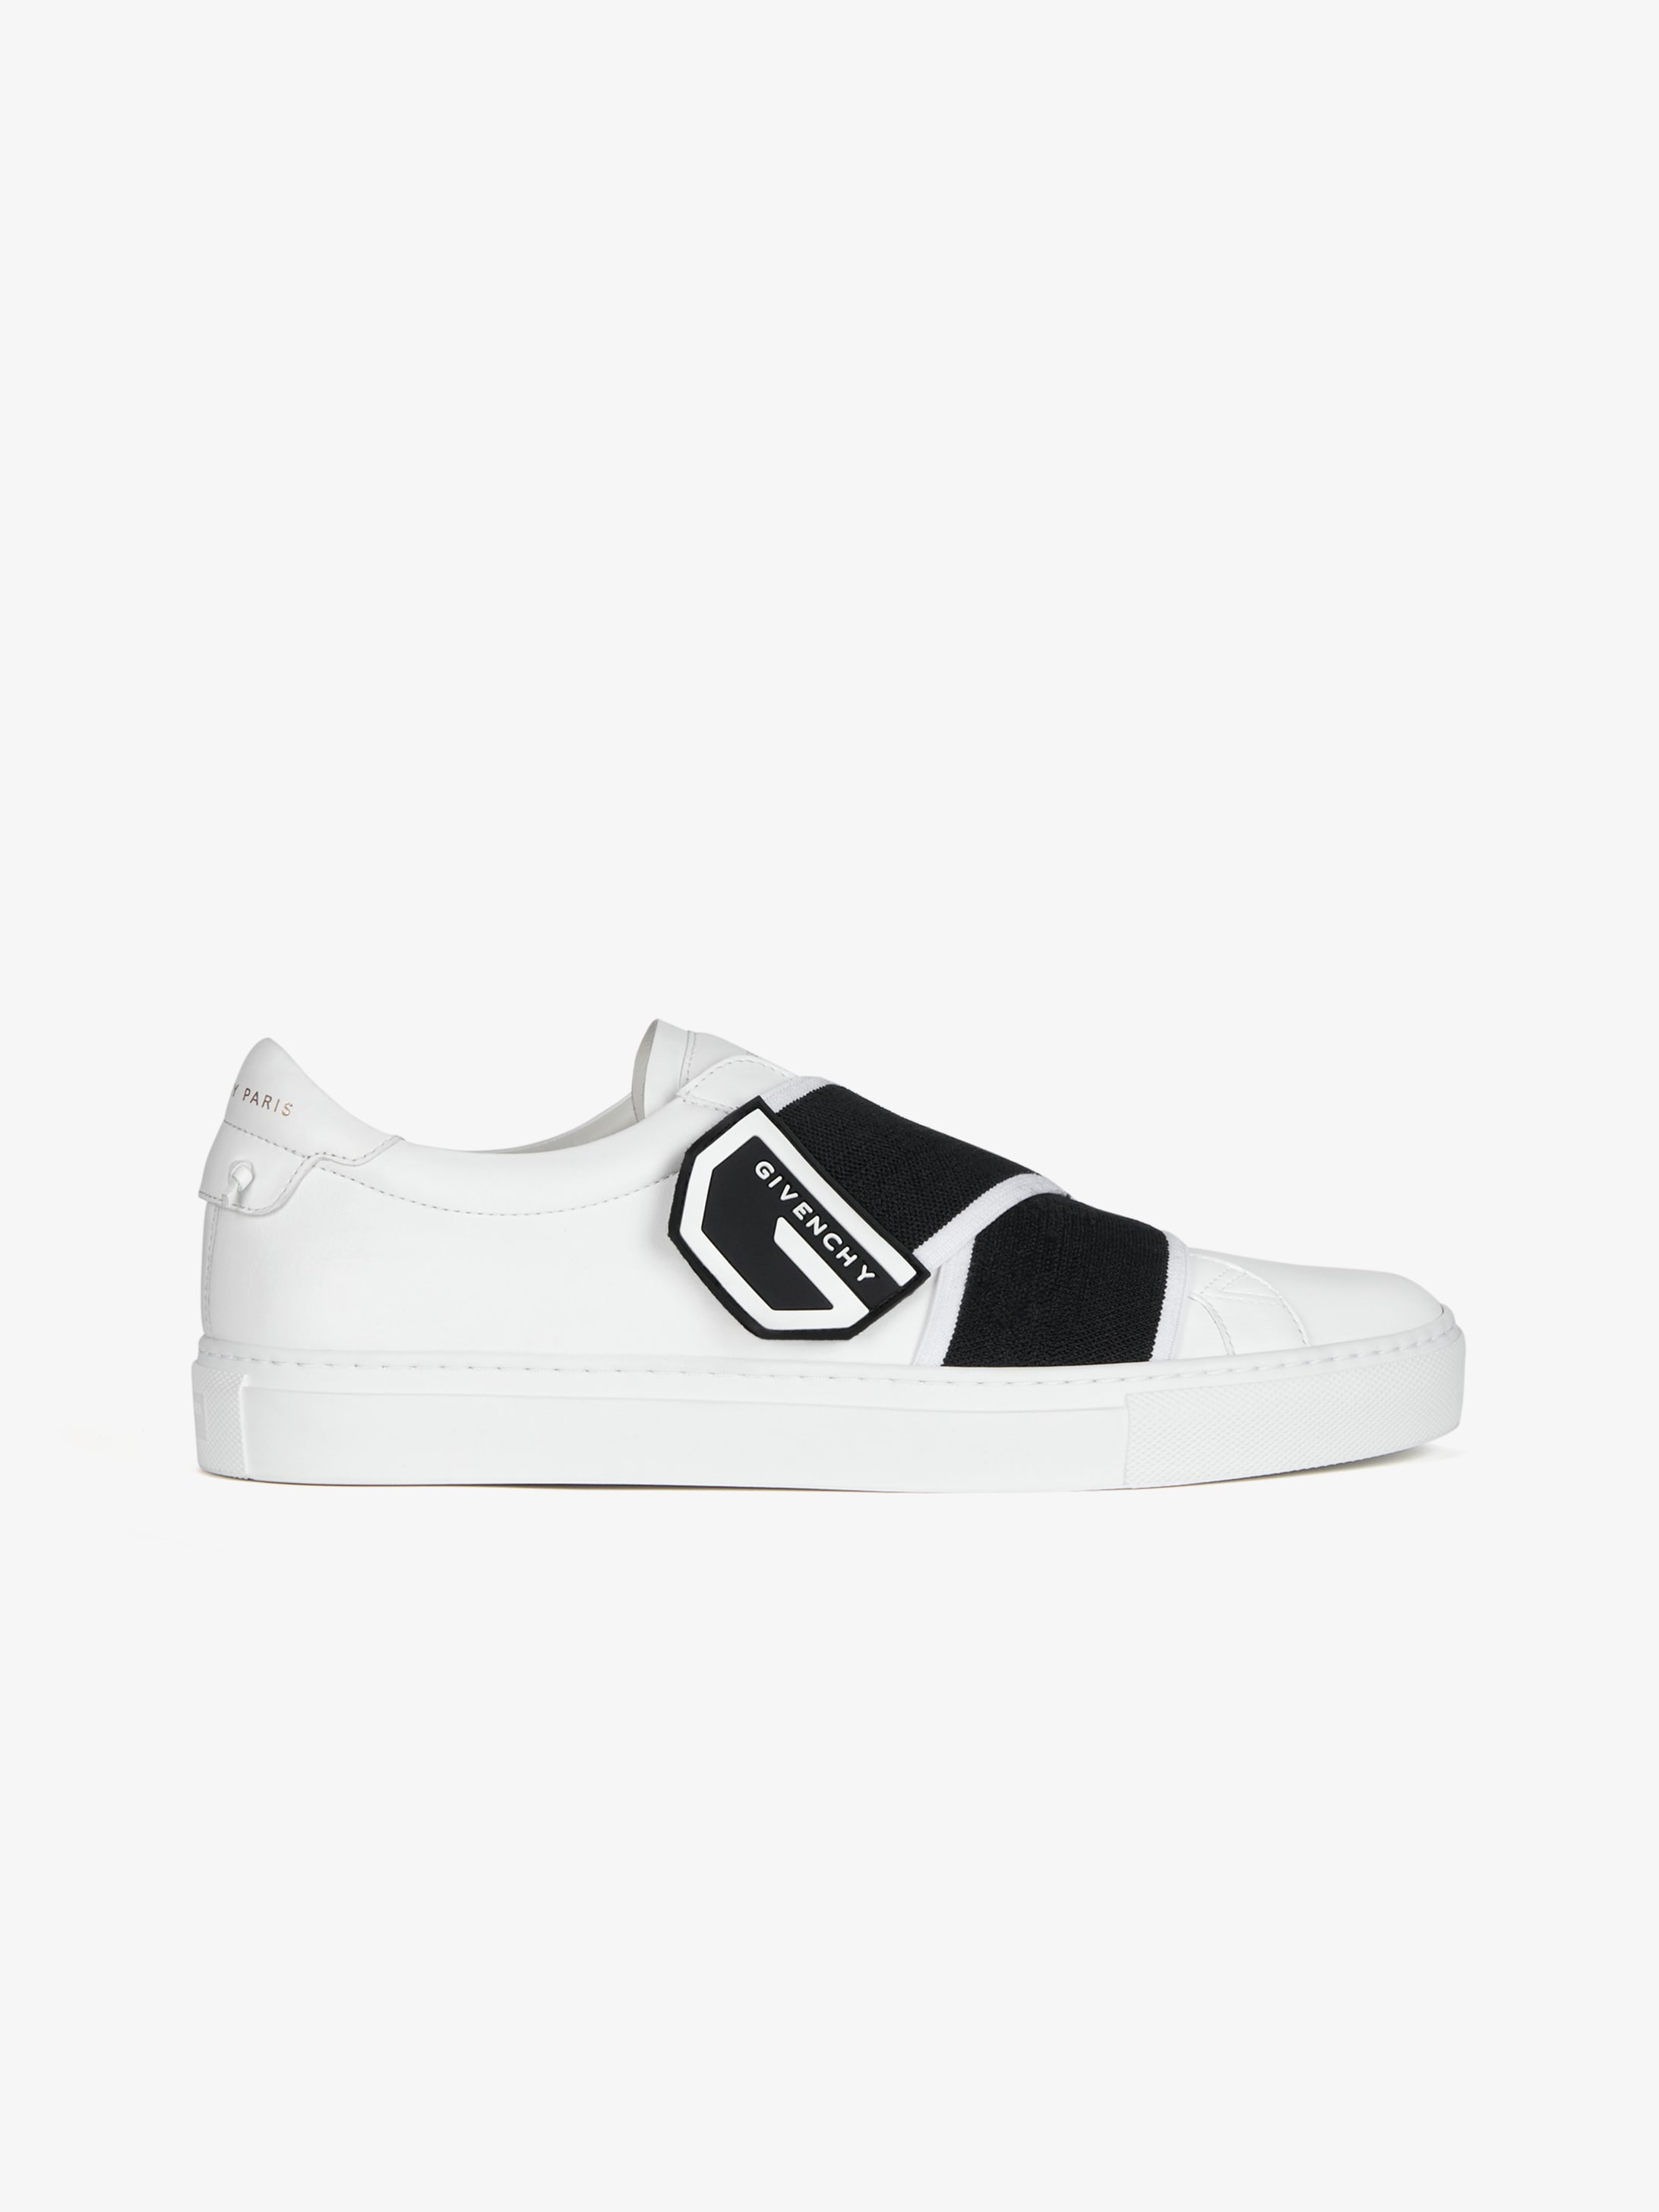 GIVENCHY crossed webbing sneakers in 